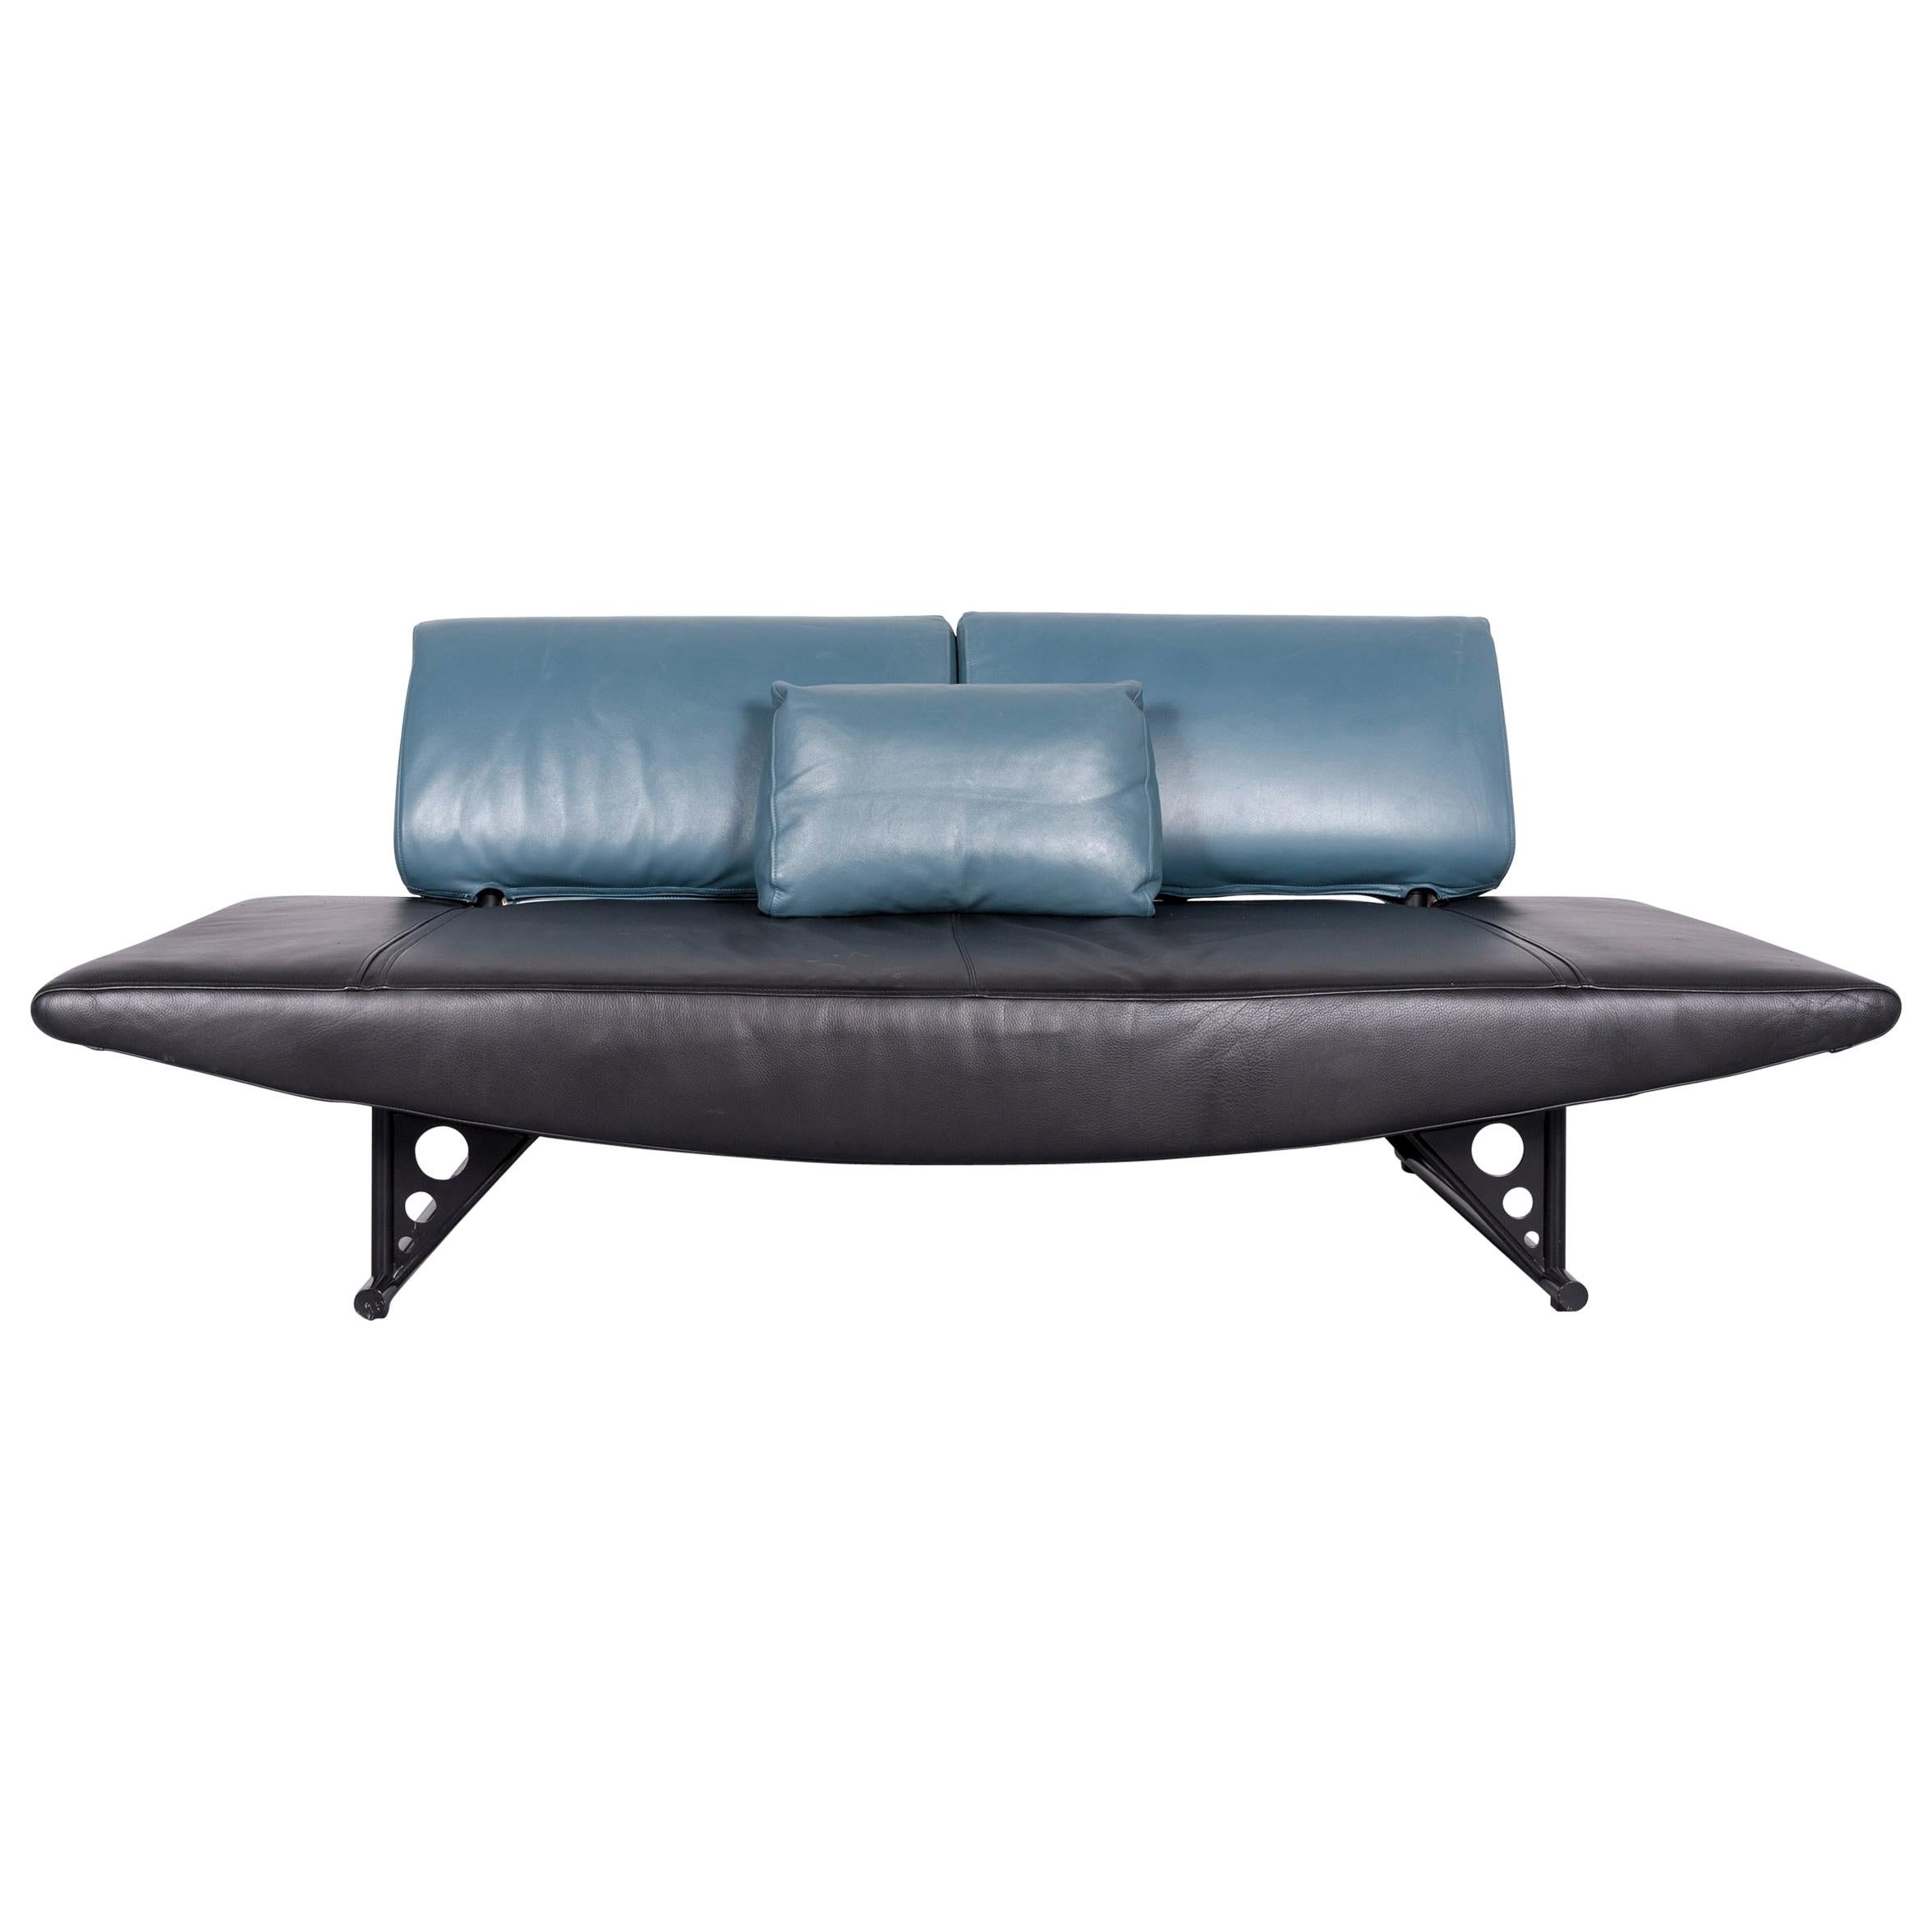 COR Cirrus Designer Sofa Black Leather Function Modern Made in Germany